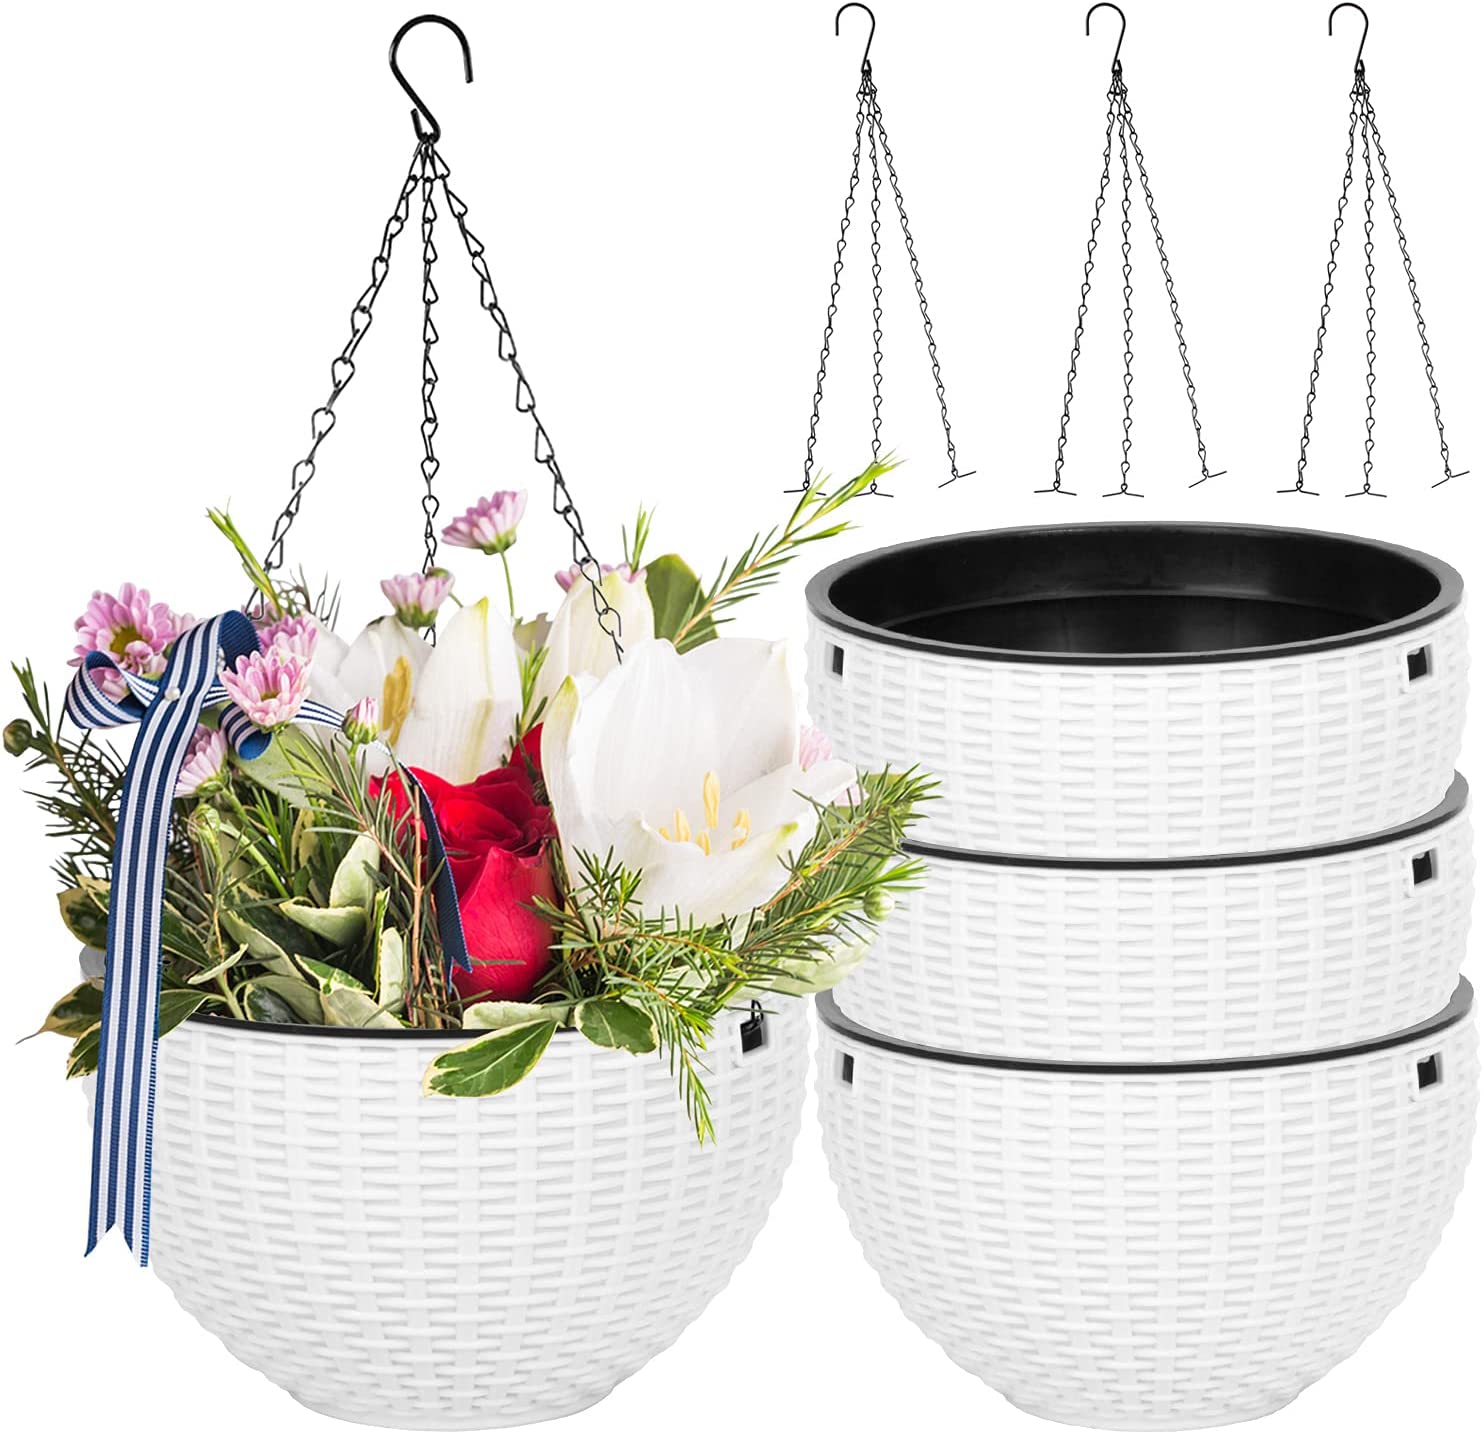 Set of 4 White Hanging Planter Basket Outdoors, Laerjin Hanging Flower Pots with Drainage Holes, 6.6 Inch Indoor Outdoor Balcony Patio Hanging Basket 